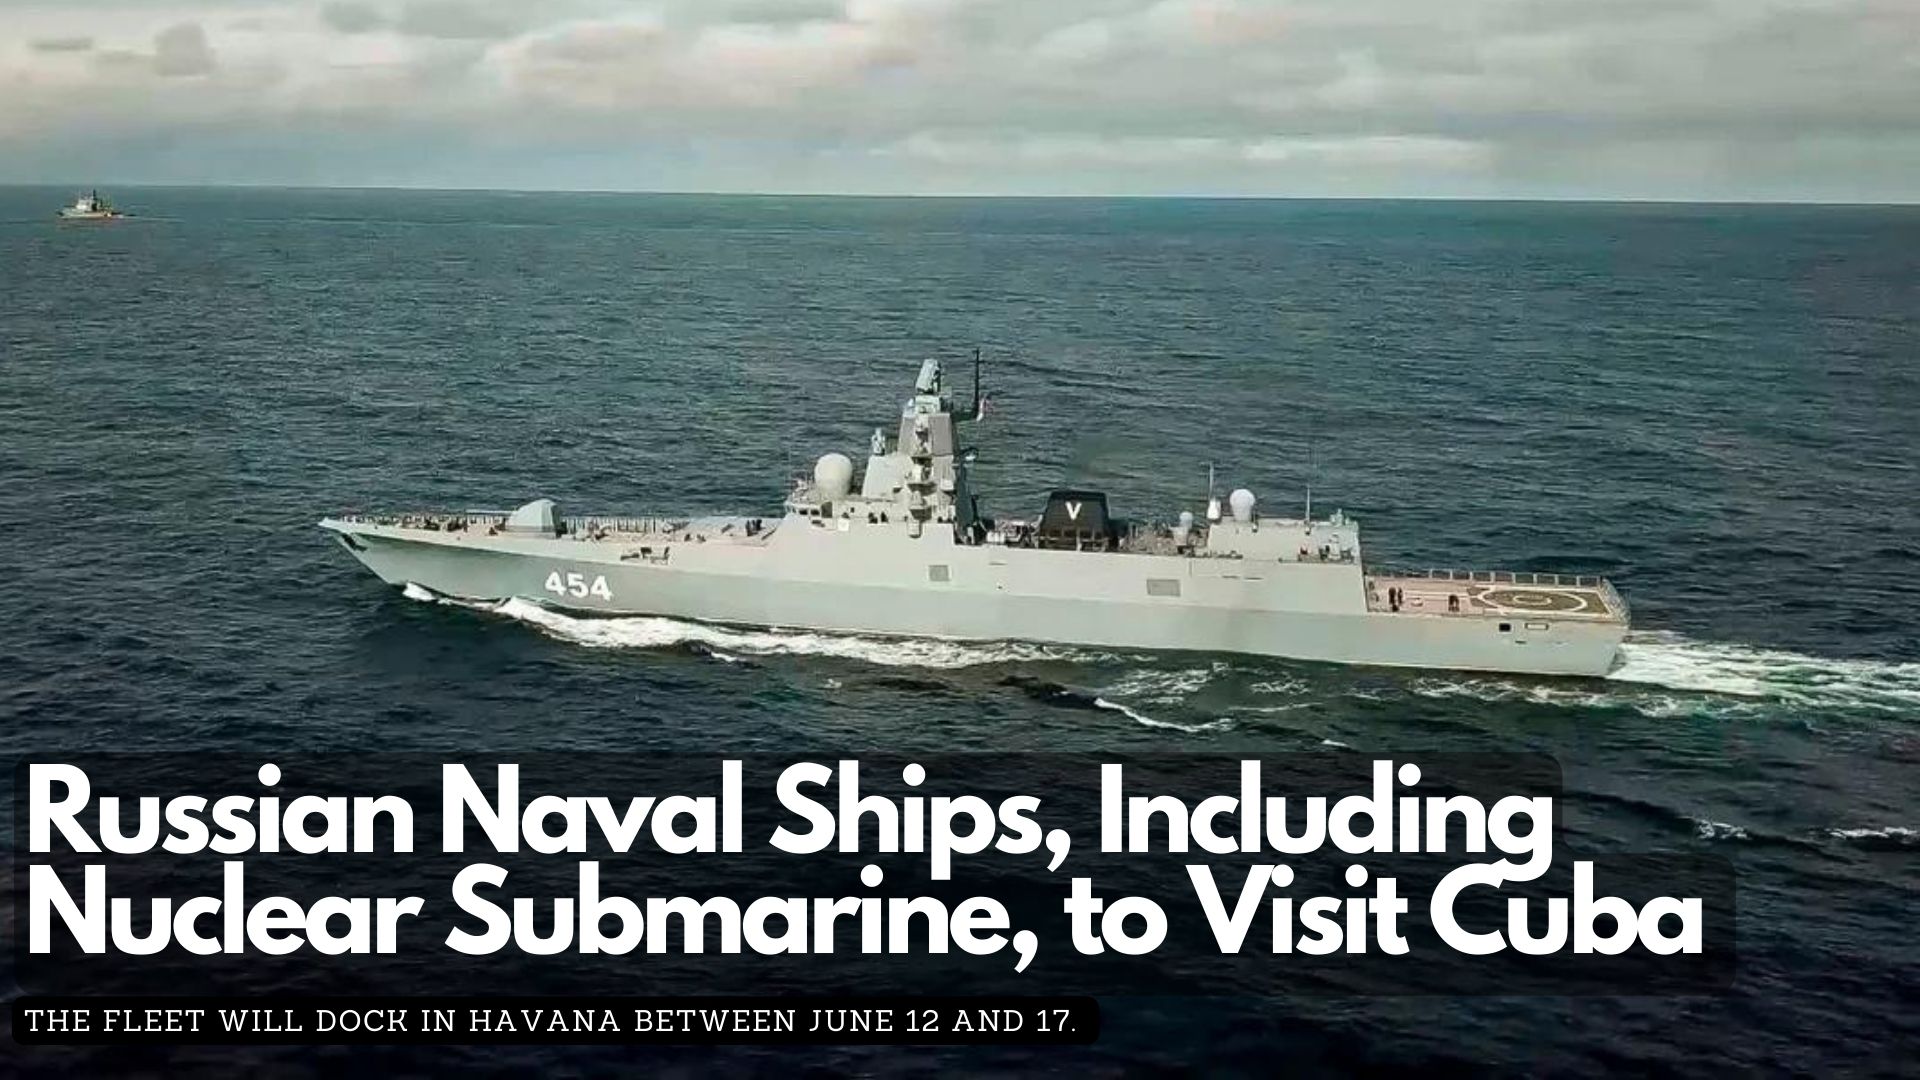 Russian Naval Ships, Including Nuclear Submarine, to Visit Cuba